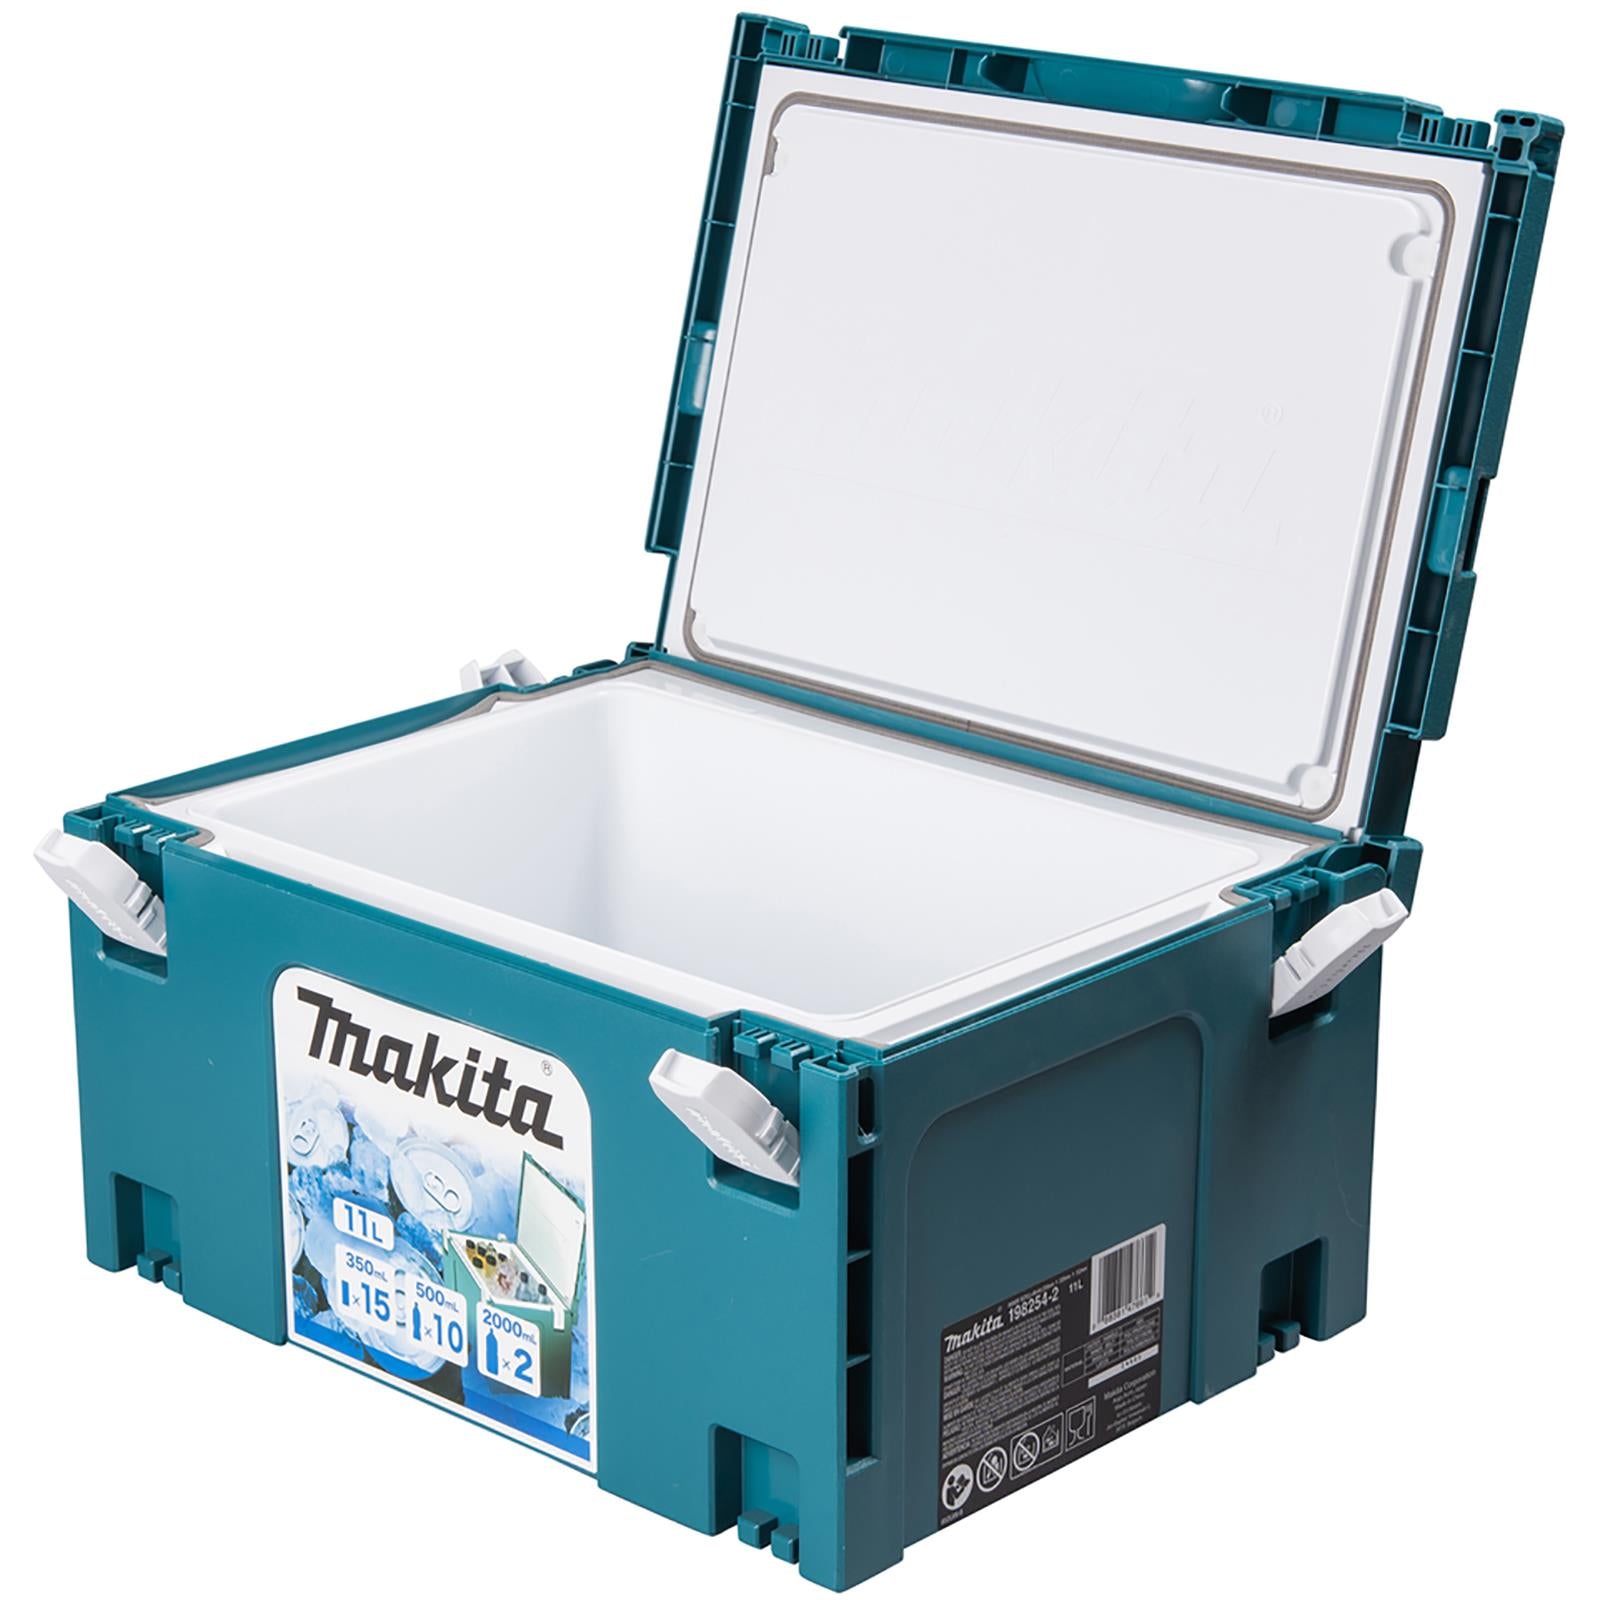 Makita Cool Box Makpac Connector Case Type 3 11 Litres 198254-2